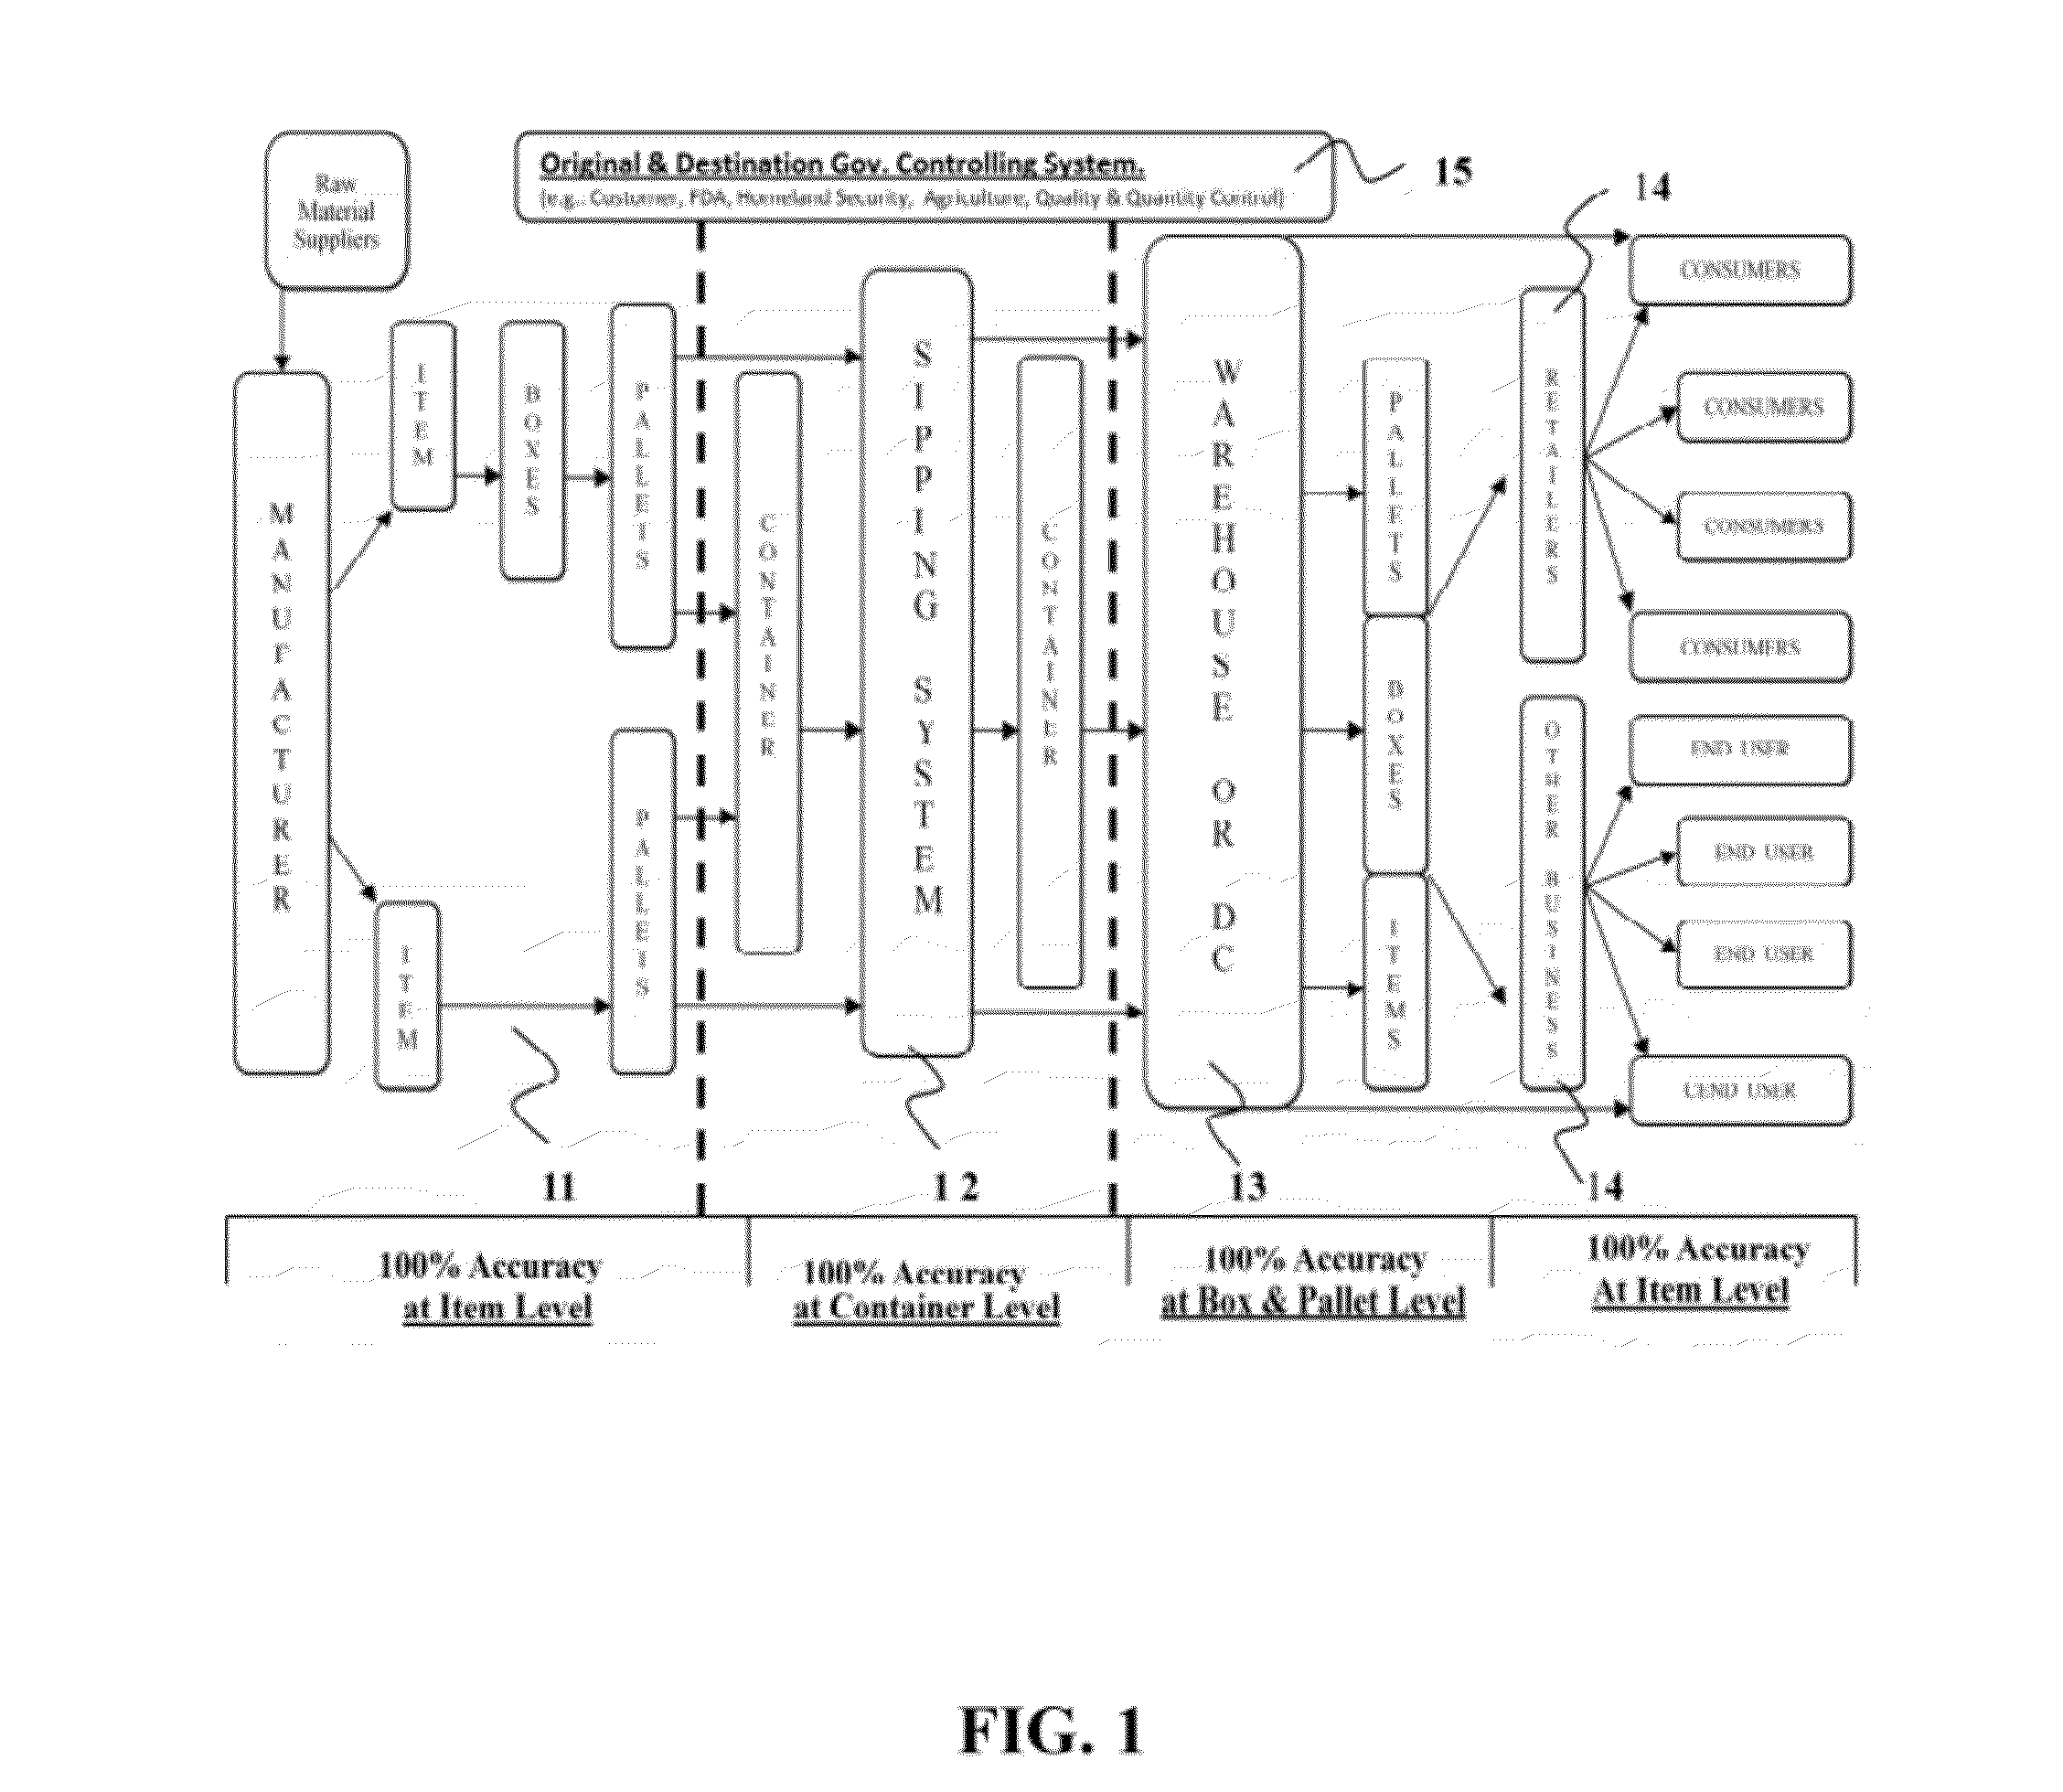 Universal and reusable RFID system and method for use in supply chain and logistics management